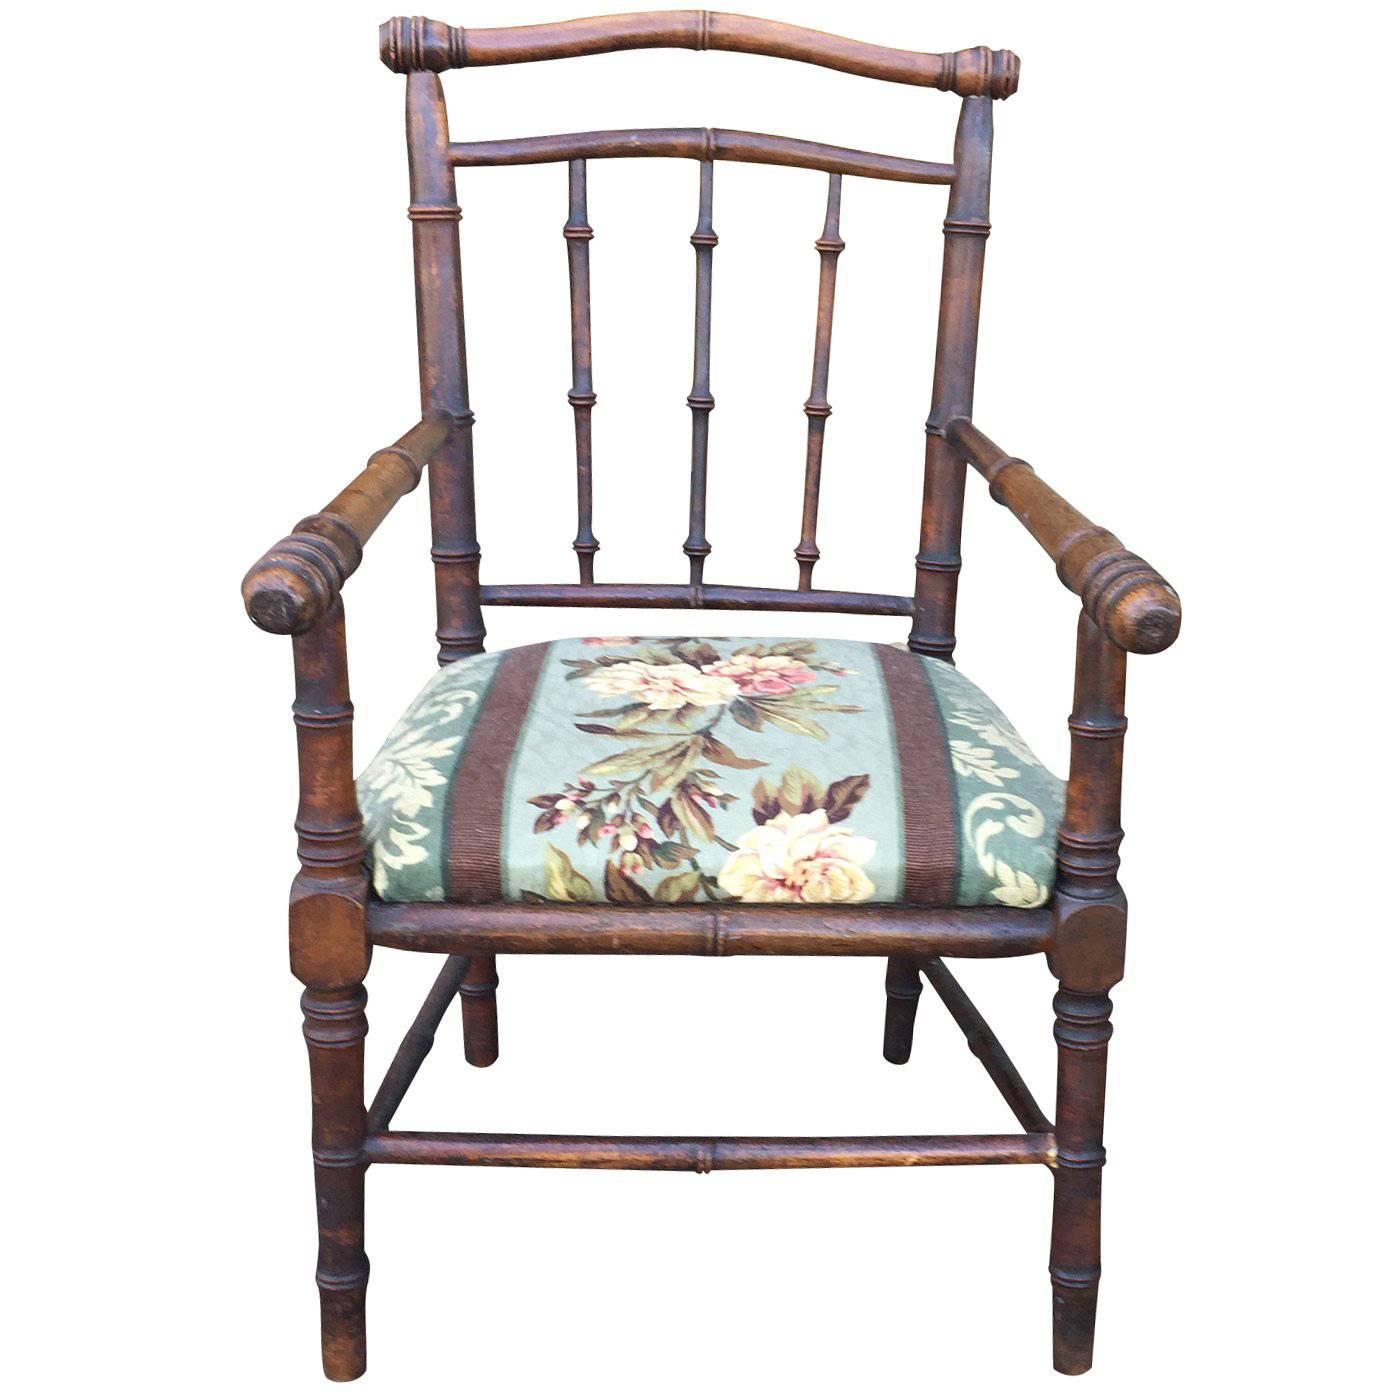 Late 19th-Early 20th Century English Faux Bamboo Childs Chair